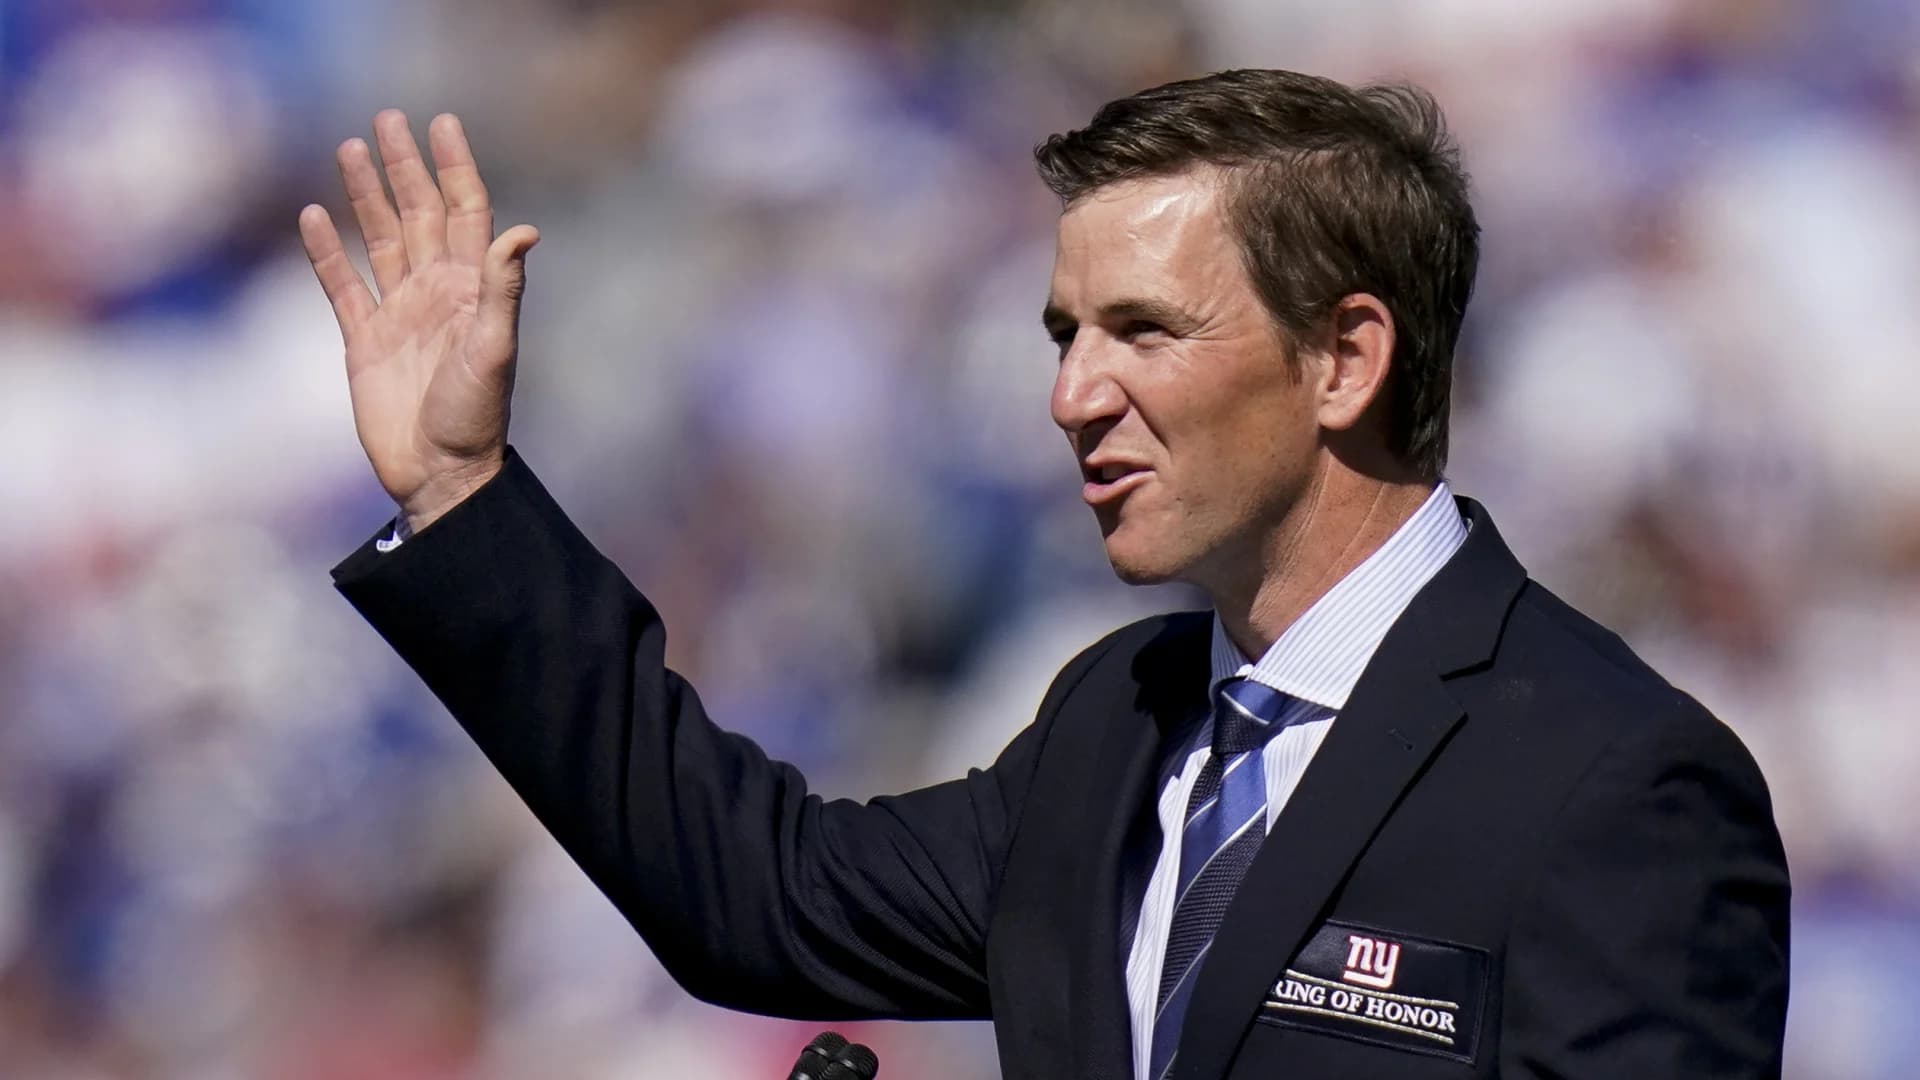 'Once a Giant, always a Giant.' Eli Manning's No. 10 retired at MetLife Stadium